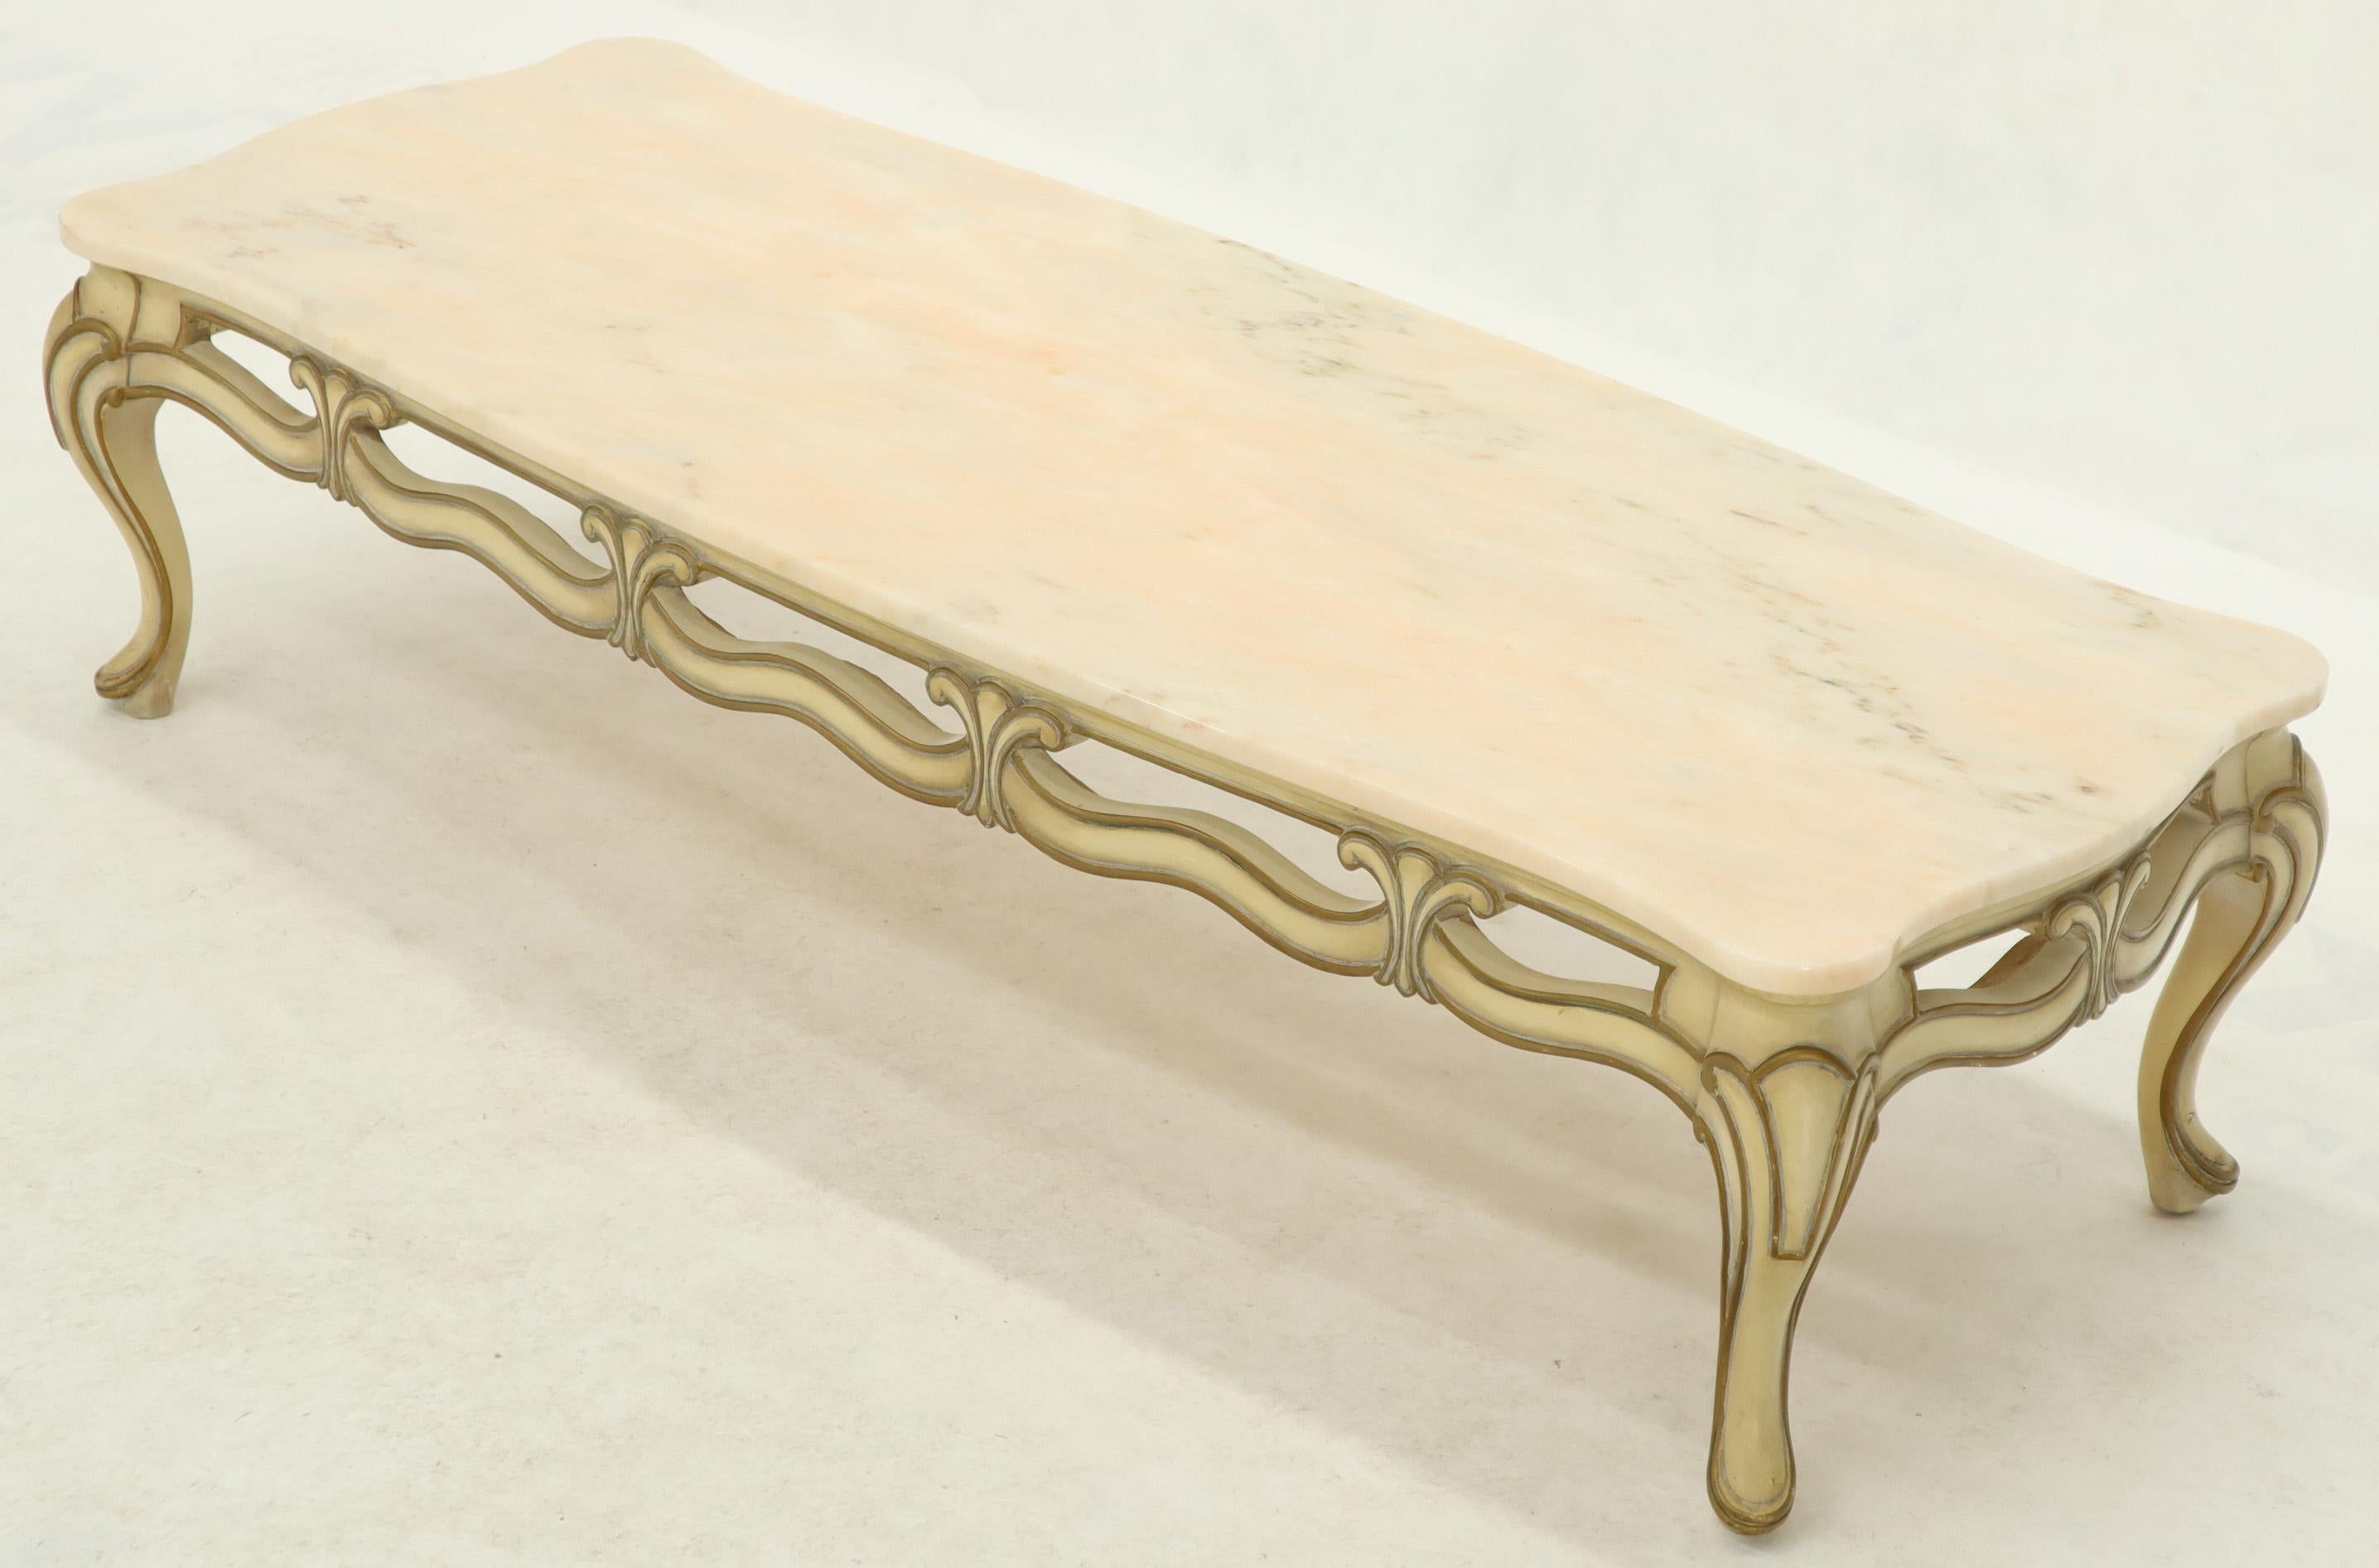 Decorator pale pink marble top cabriole leg French Provincial coffee table with elaborate pierced carving base.